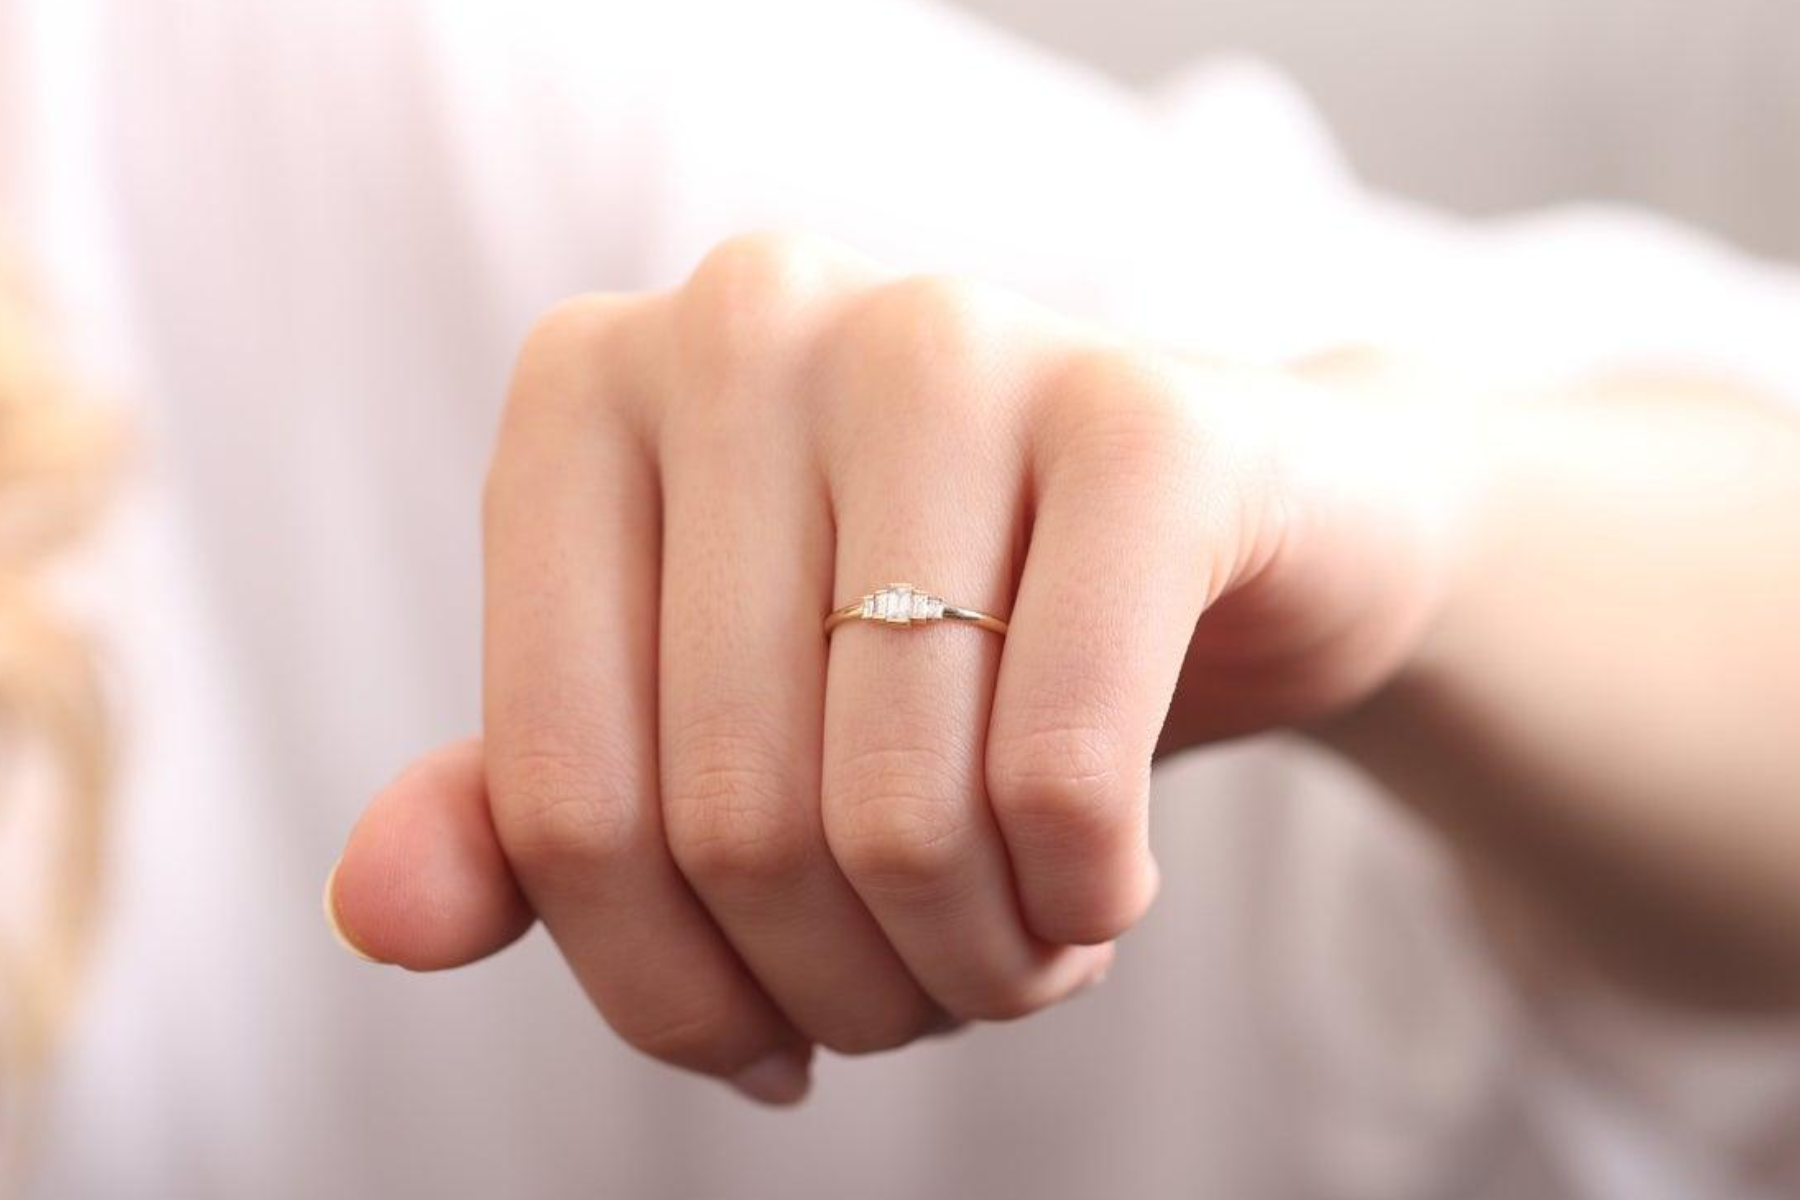 A woman's ring finger with a minimal wedding band